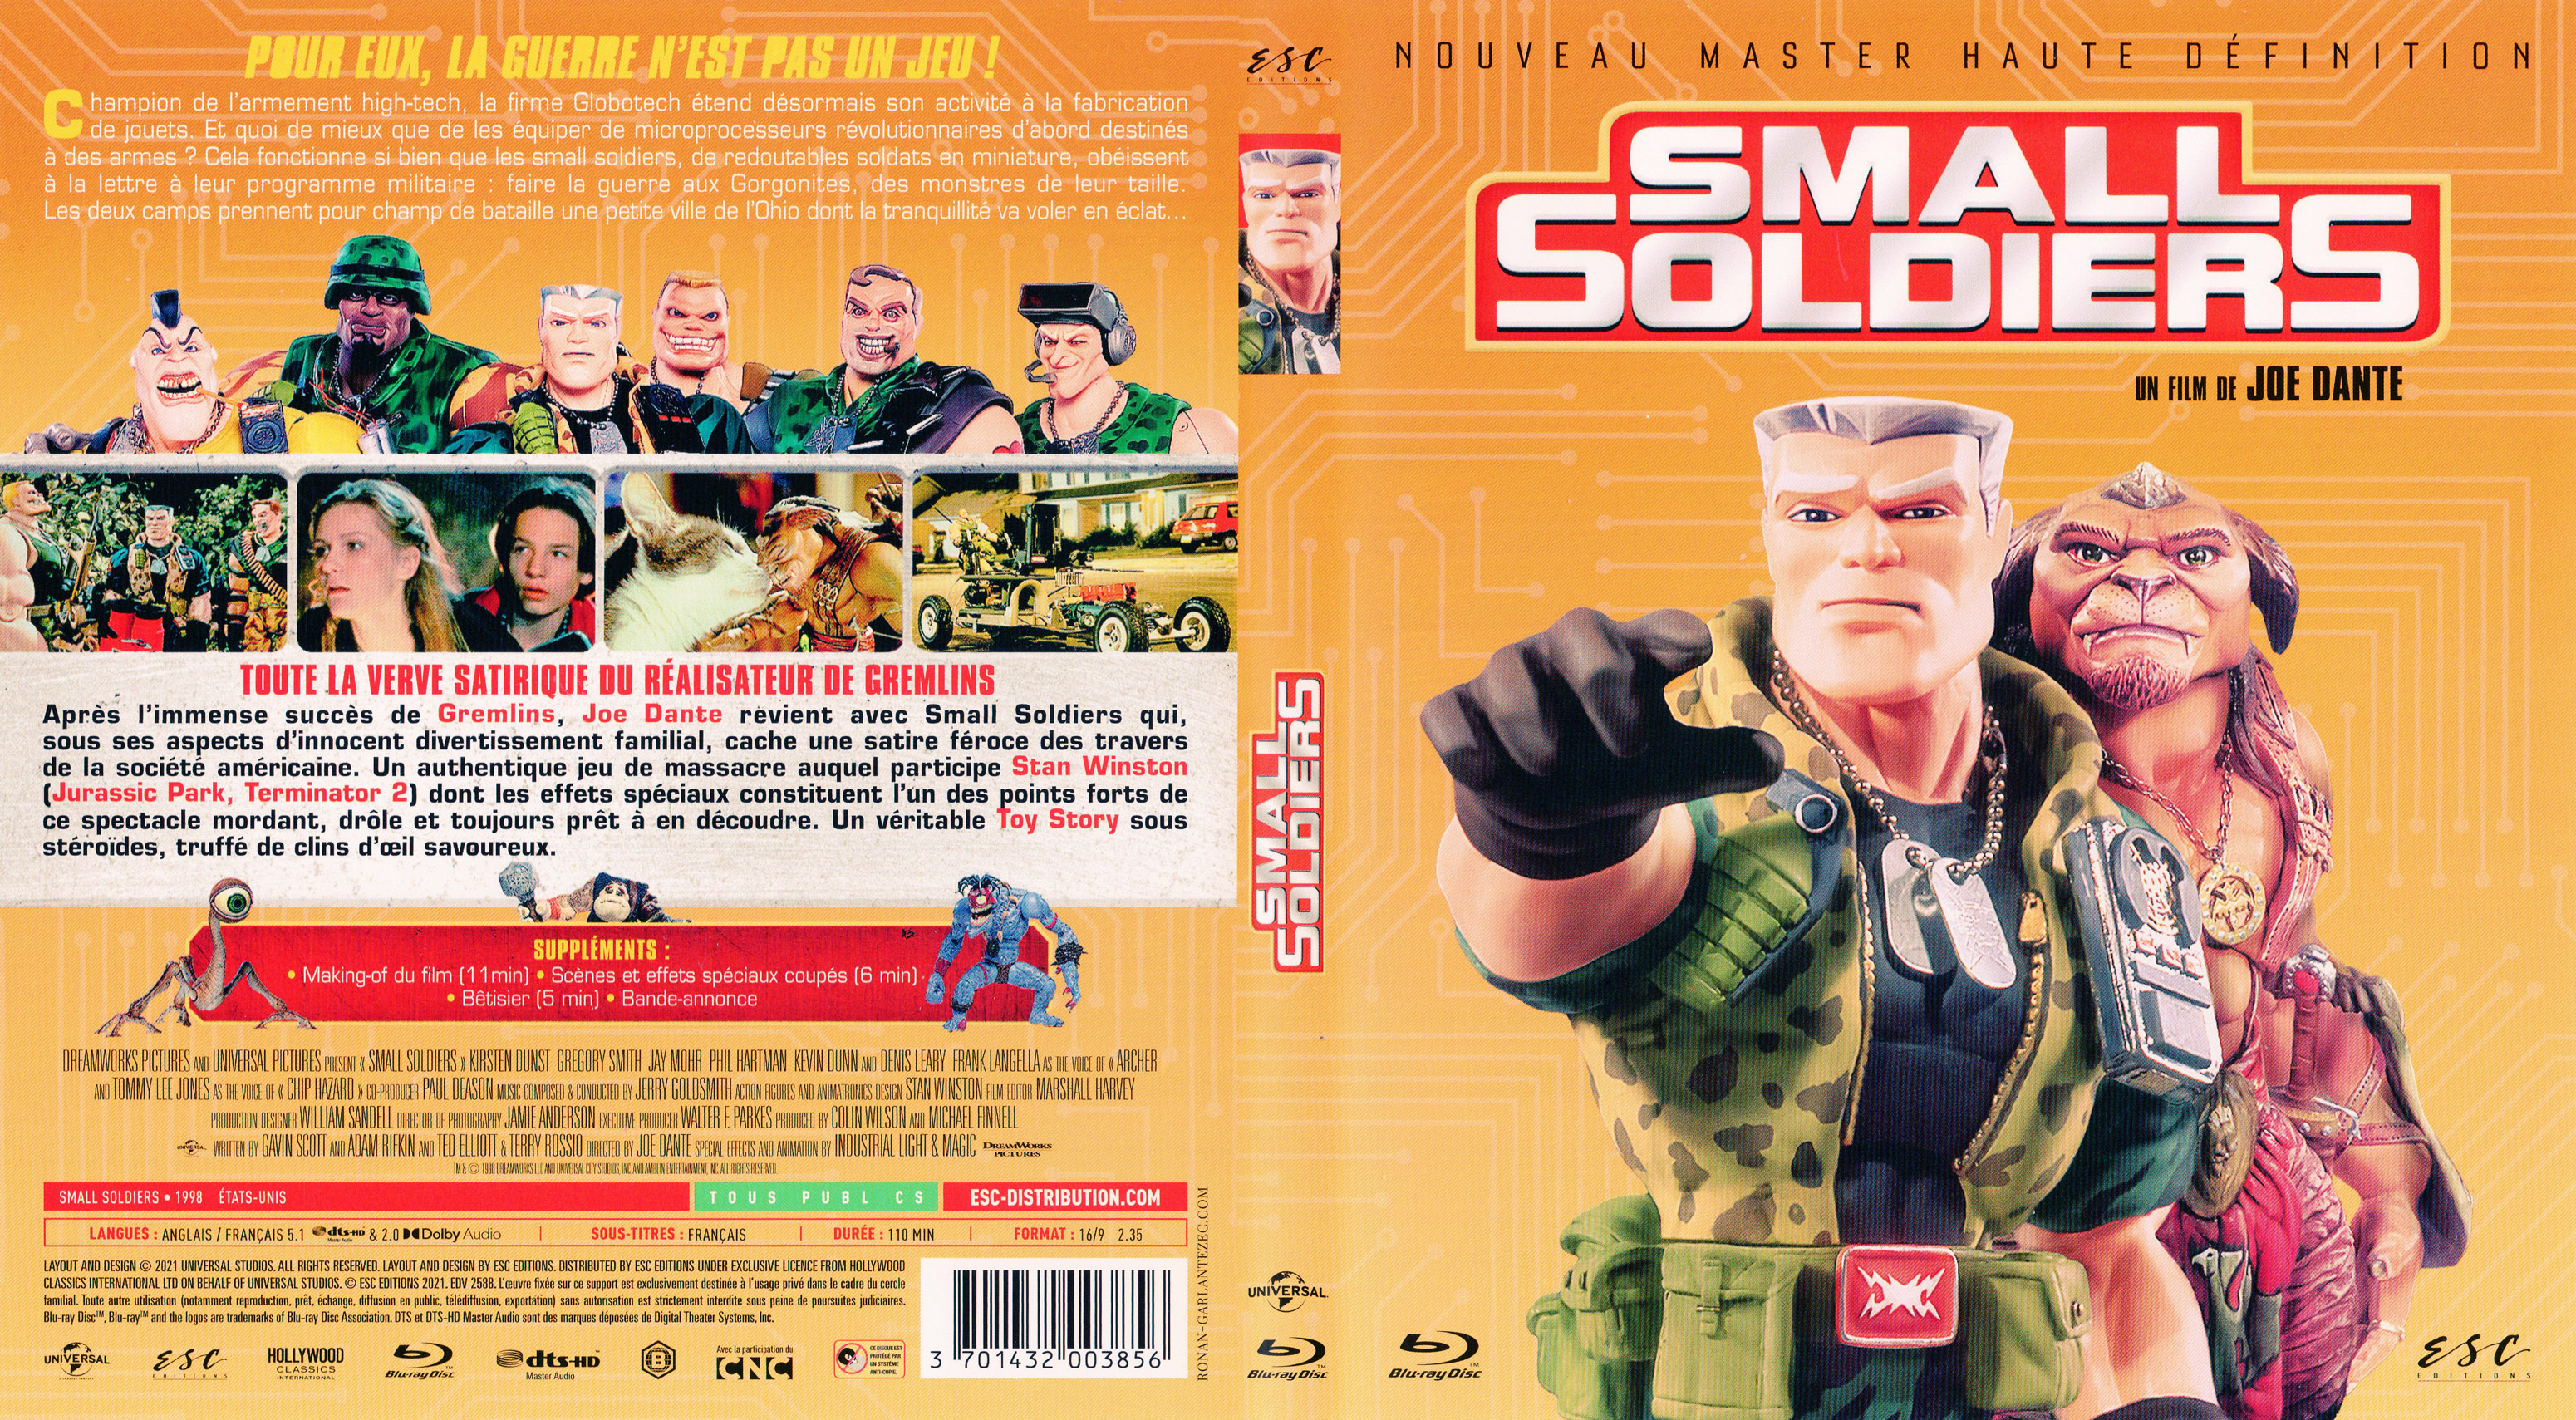 Jaquette DVD Small soldiers (BLU-RAY)